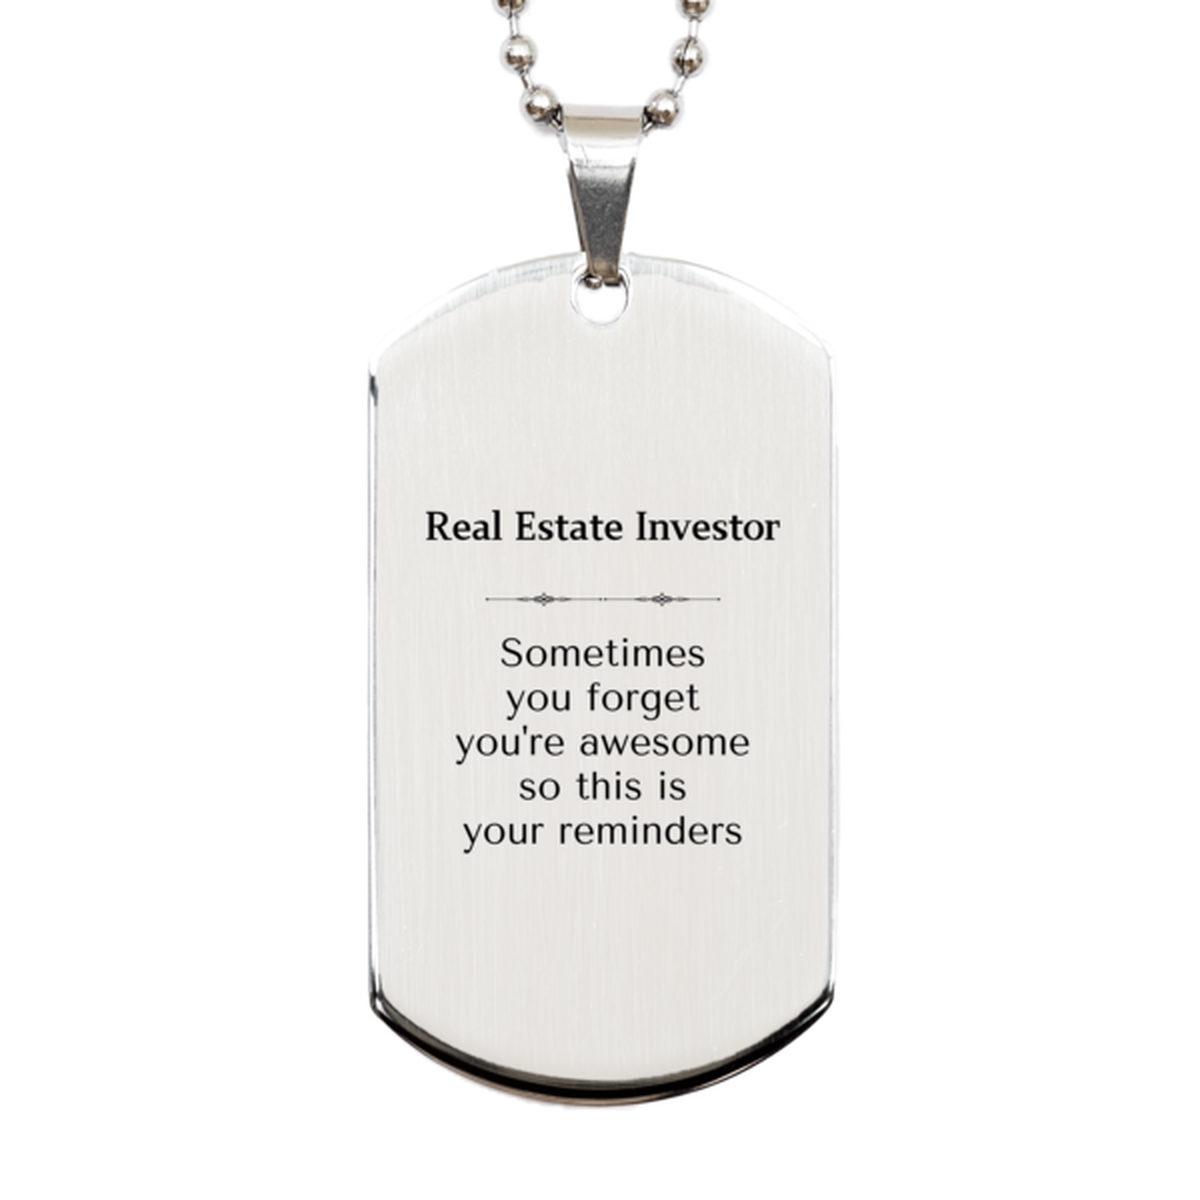 Sentimental Real Estate Investor Silver Dog Tag, Real Estate Investor Sometimes you forget you're awesome so this is your reminders, Graduation Christmas Birthday Gifts for Real Estate Investor, Men, Women, Coworkers